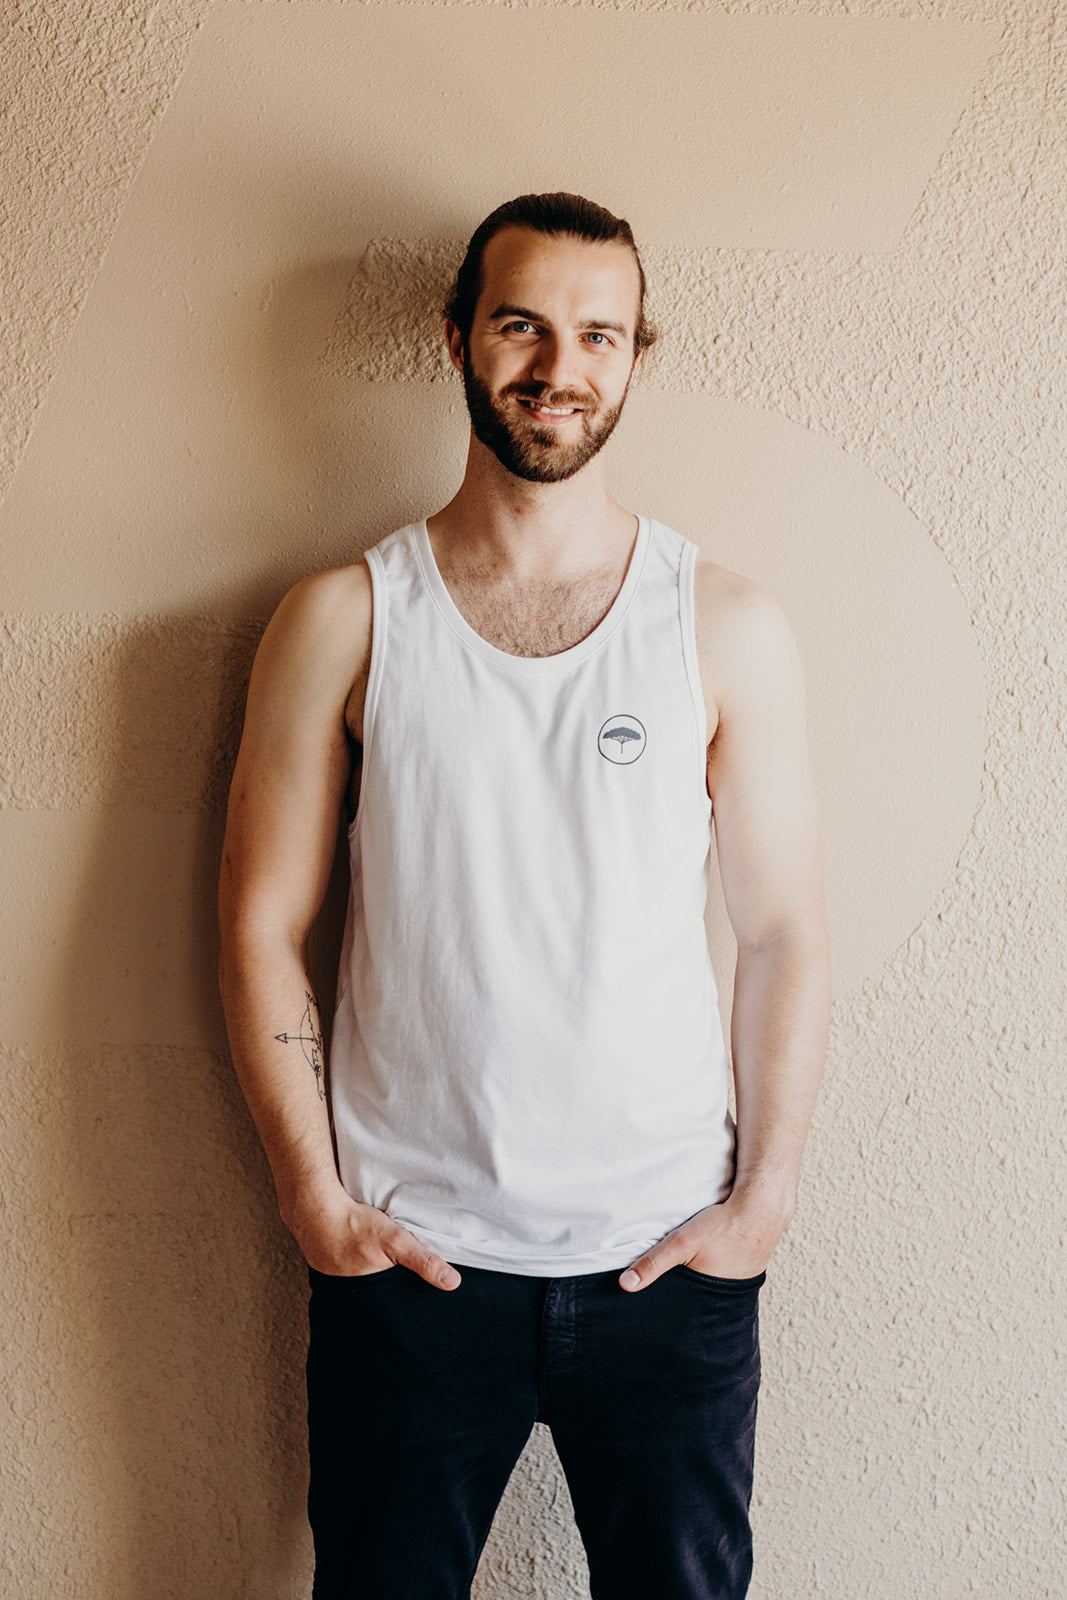 Men's recycled white tank top with small grey Ungalli logo on front